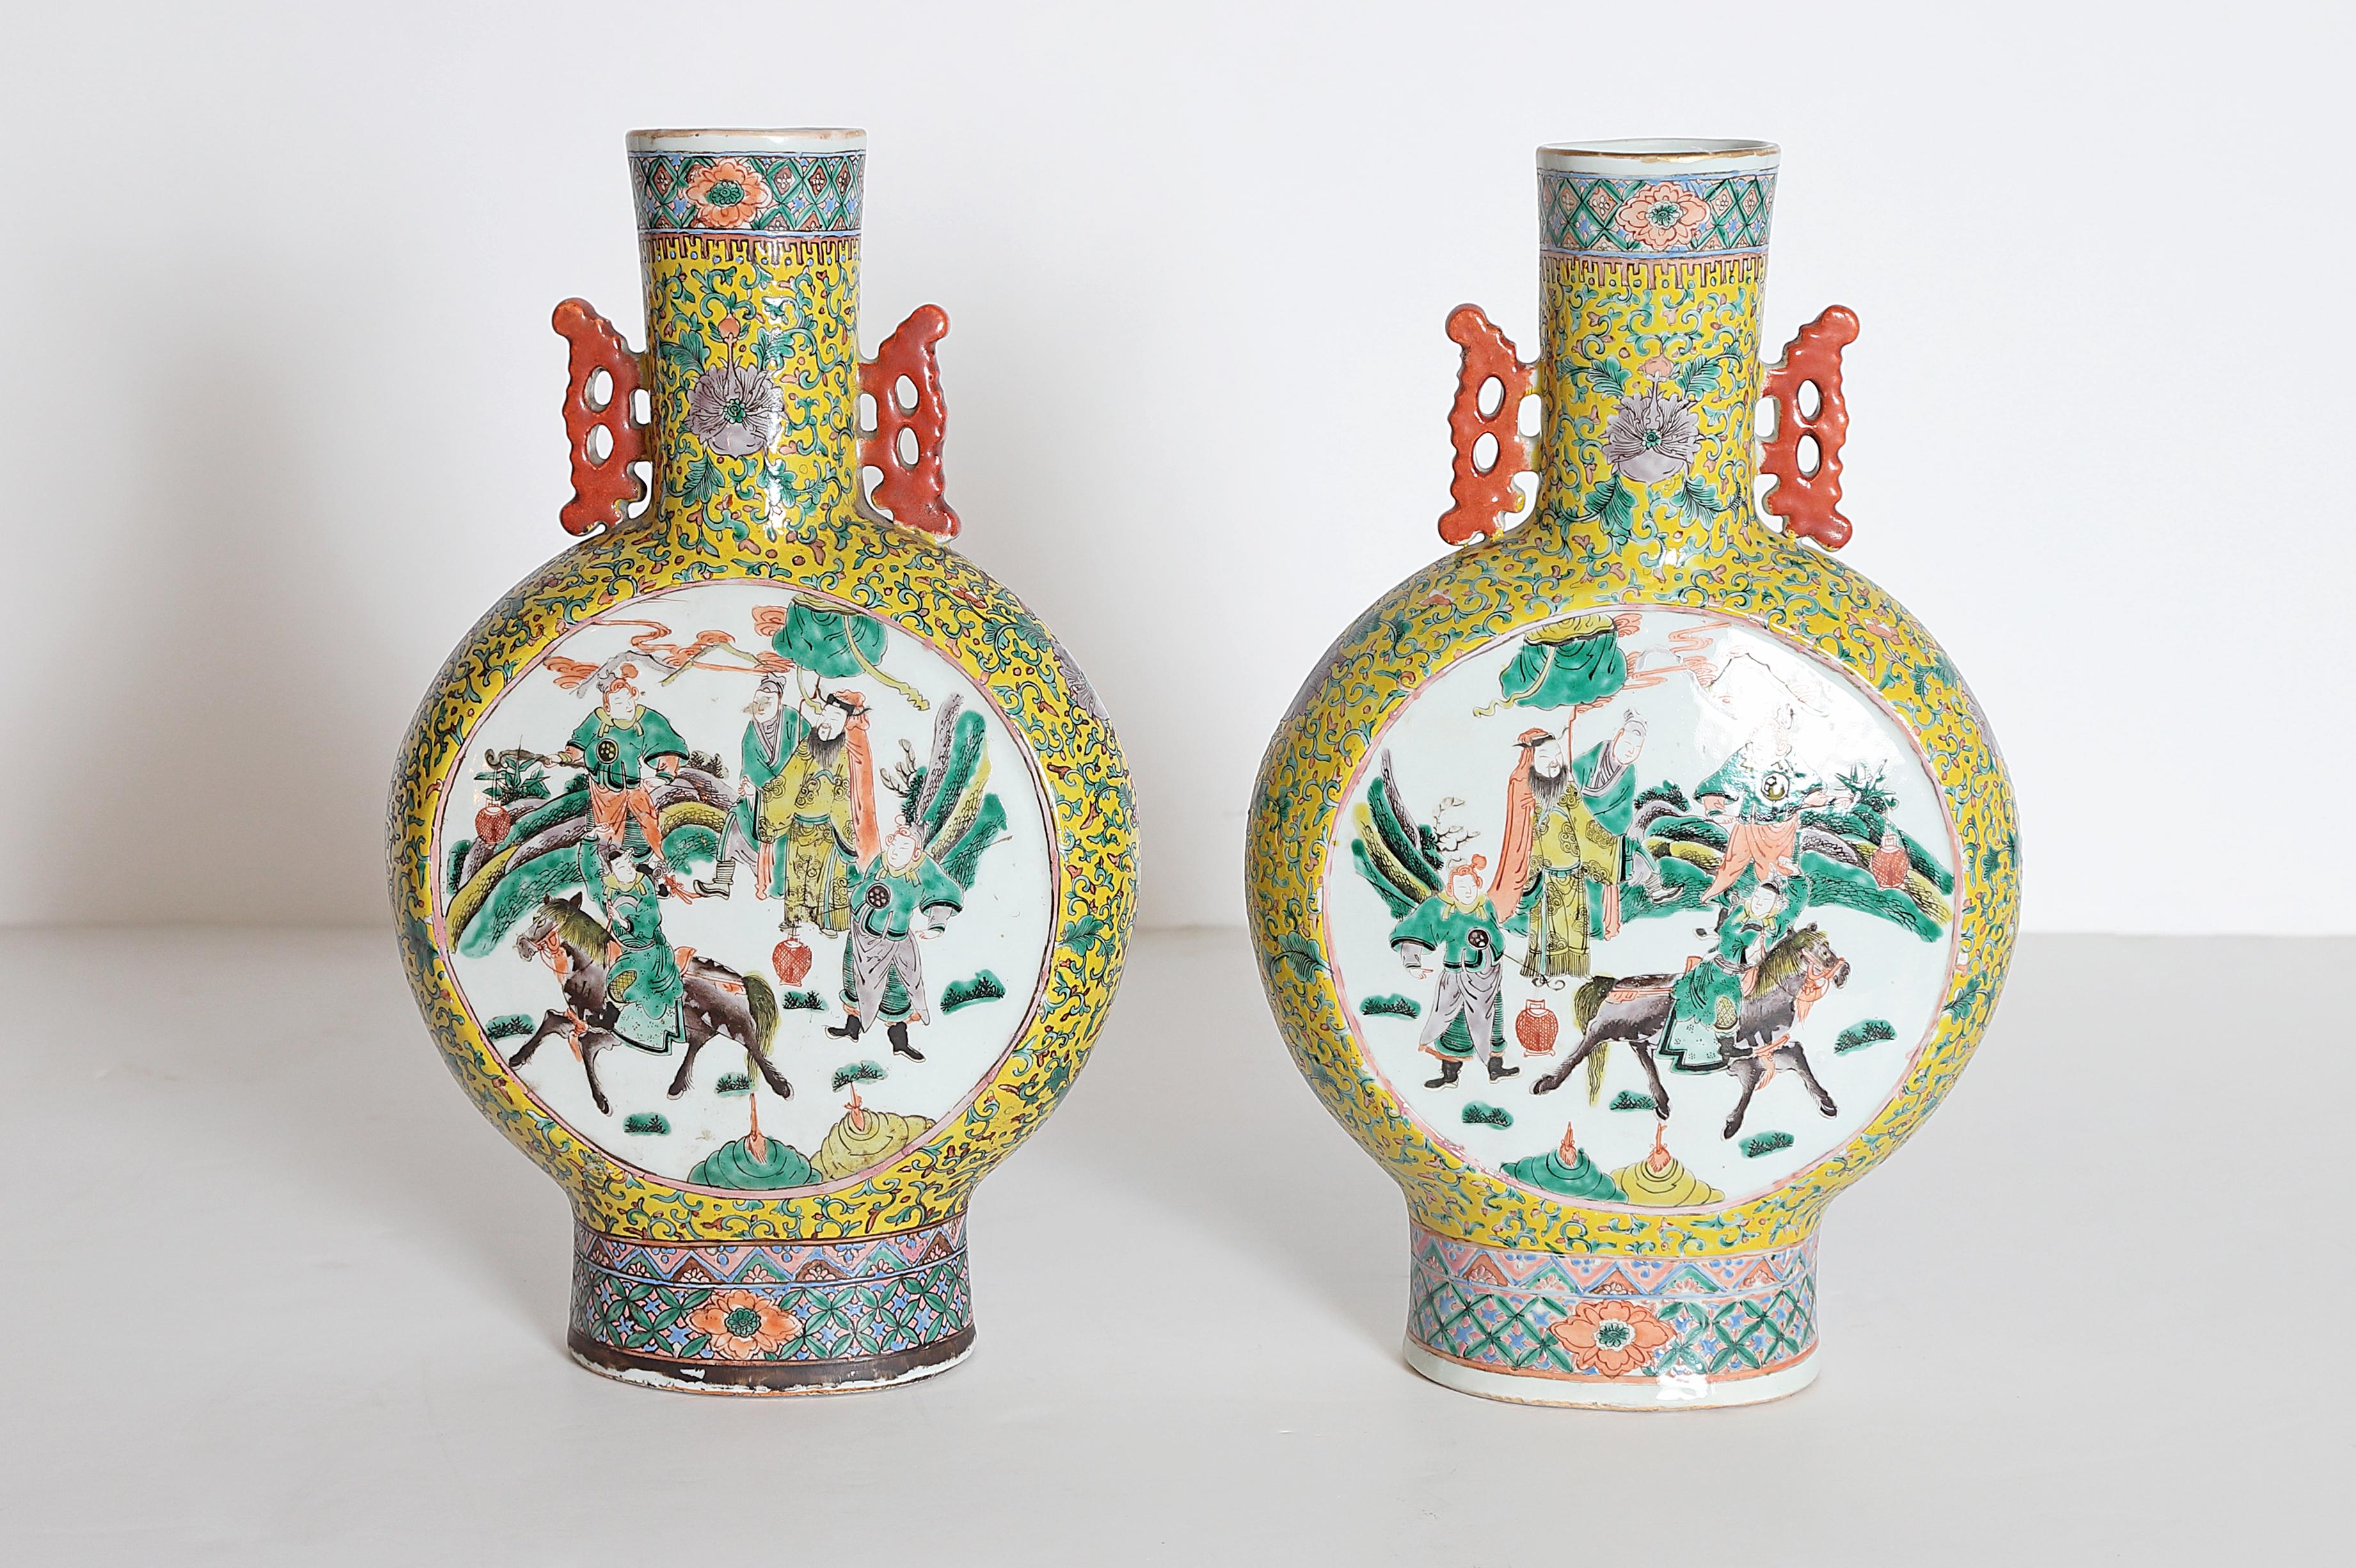 Hand-Painted Pair of Chinese Porcelain Moon Flask Vases